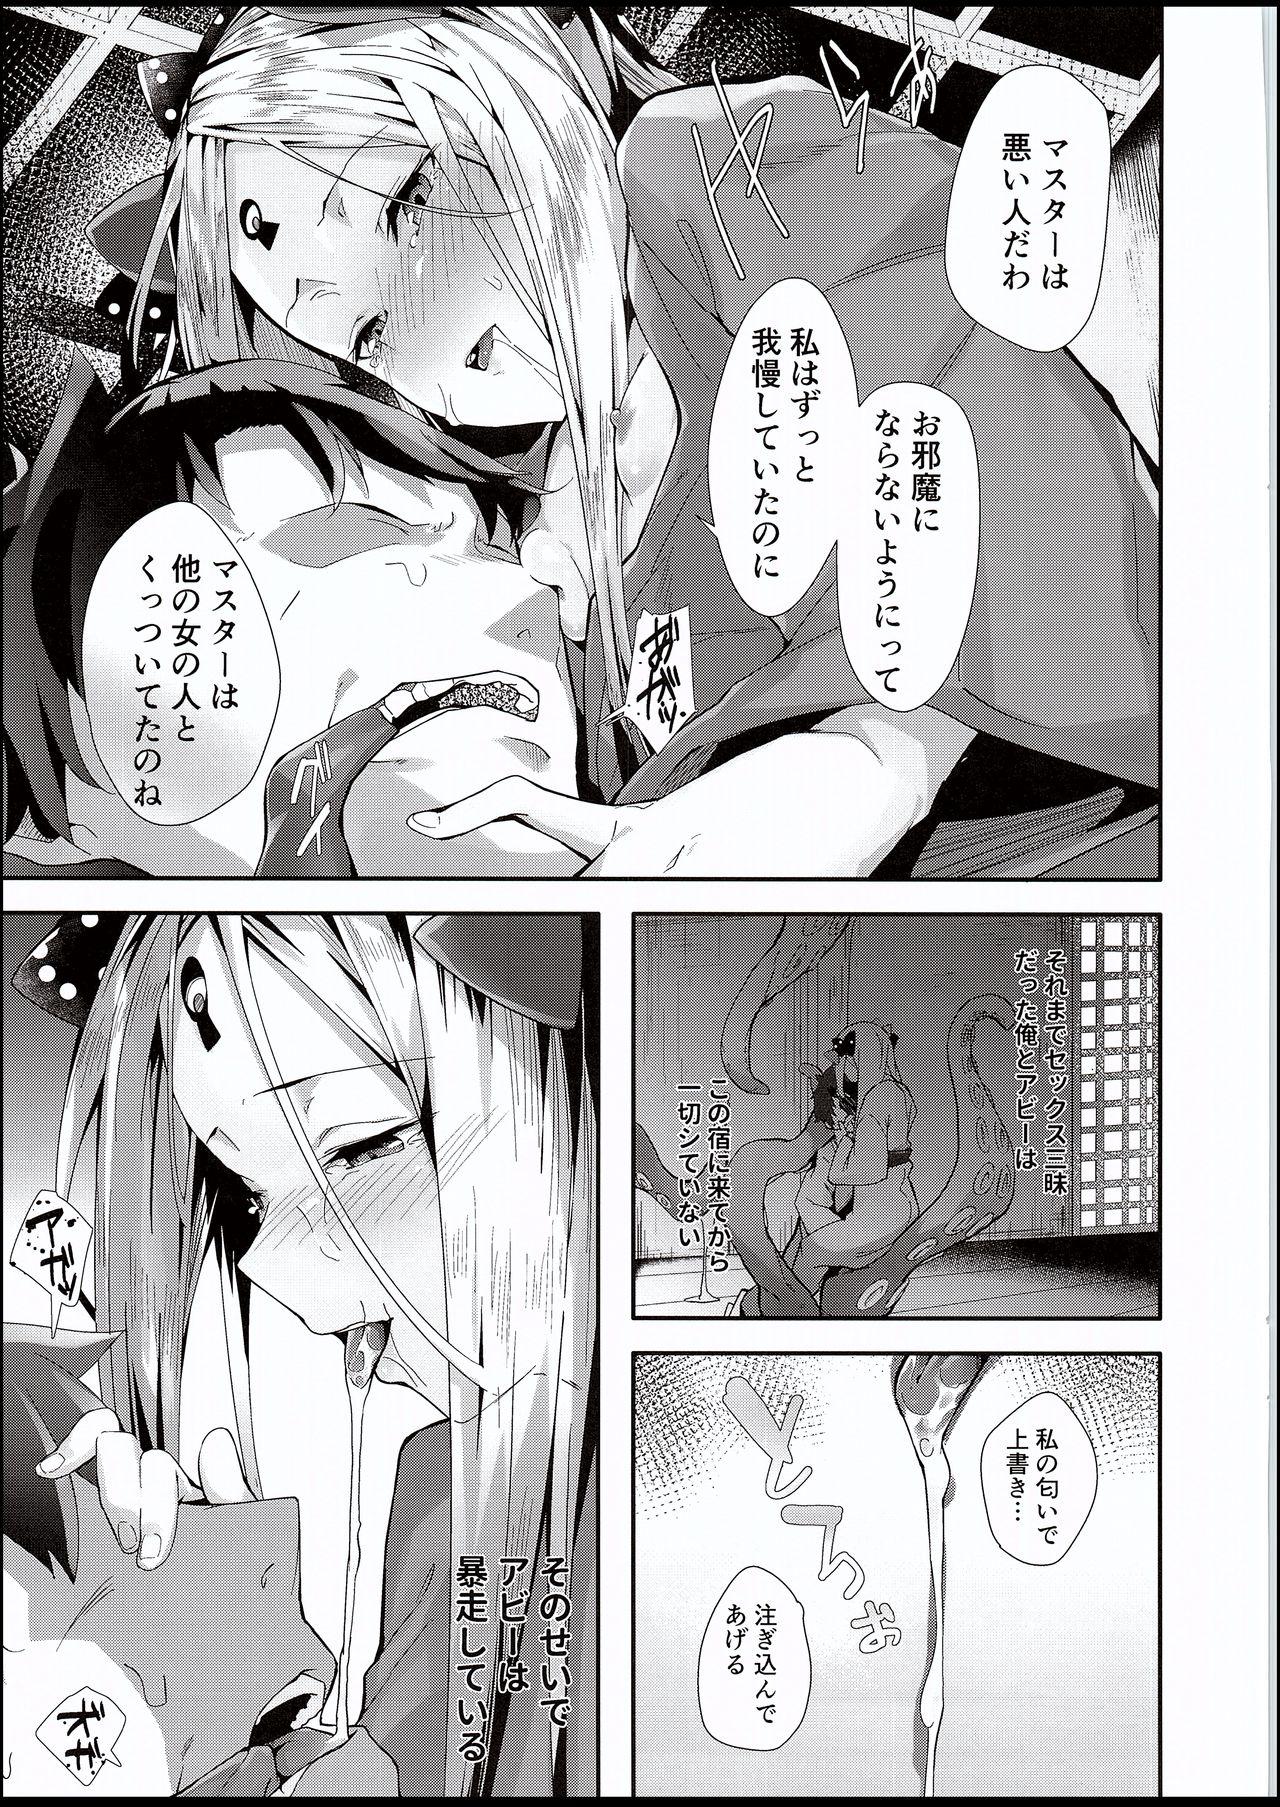 Buttplug Kaihouteki Onsen Abby - Fate grand order - Page 10